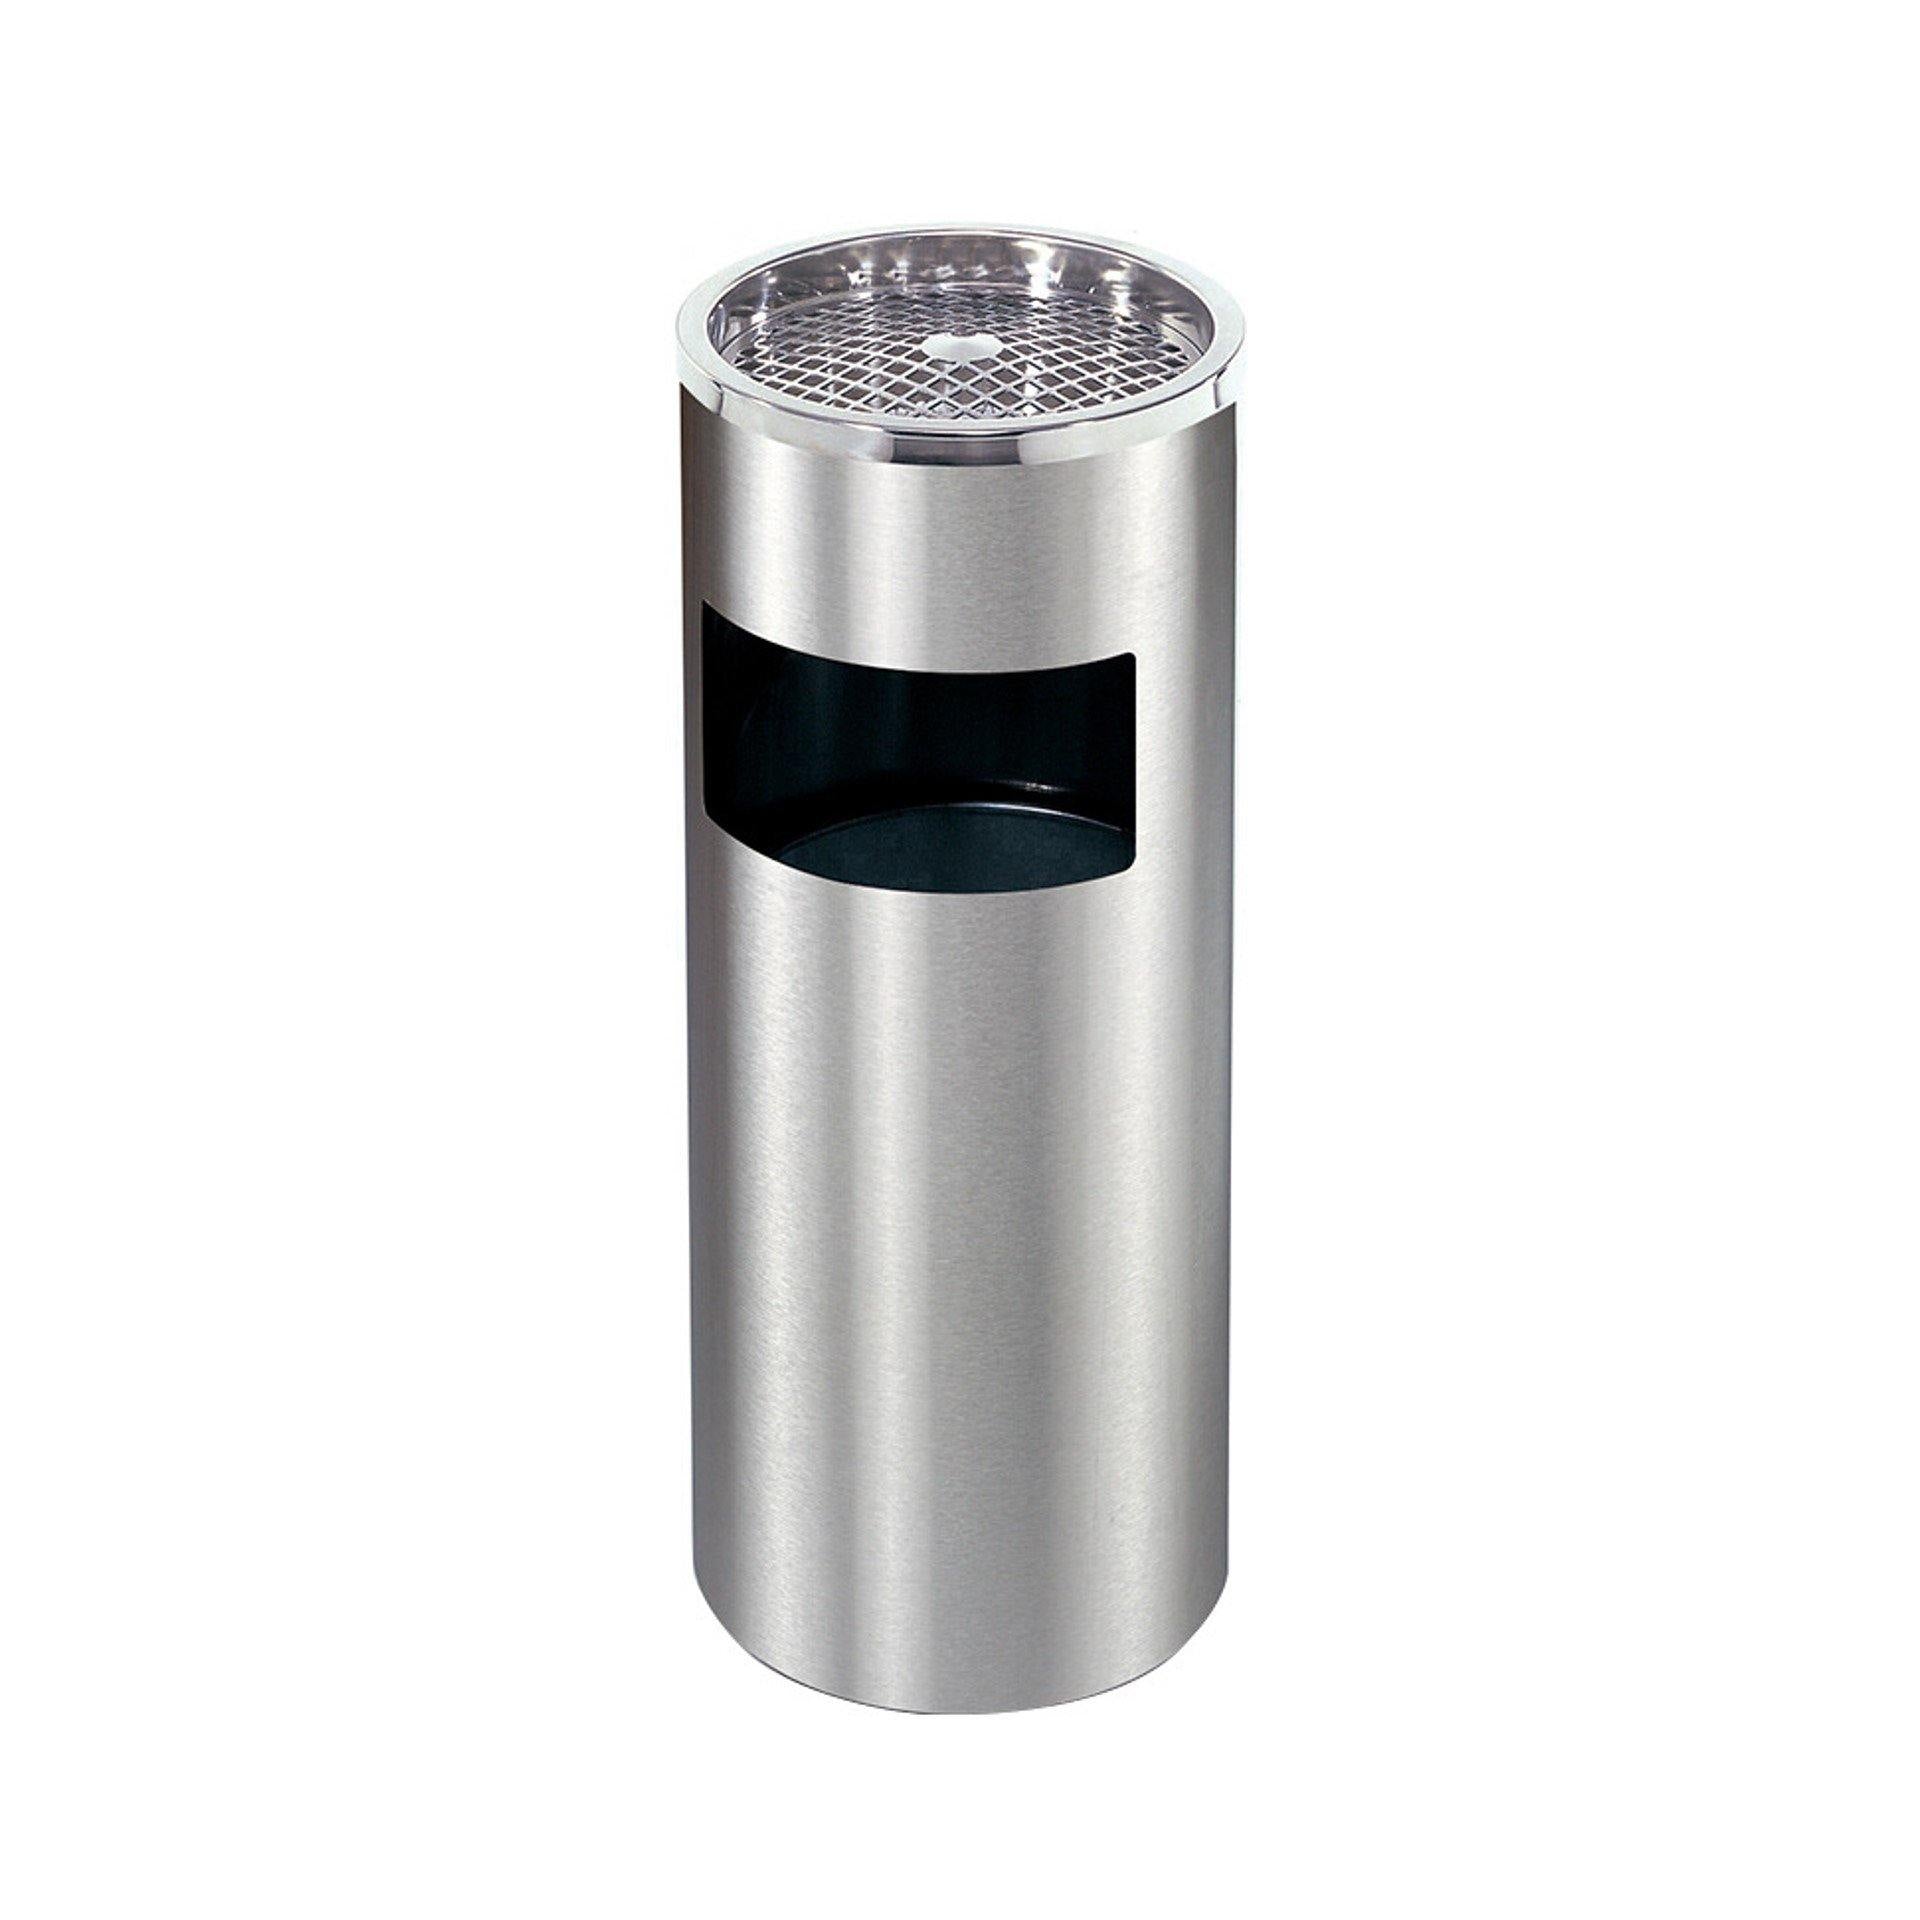 Stainless Steel Coated Ashtray Bin (12LT) - Hygiene System - Made in China, Daitona General Trading LLC